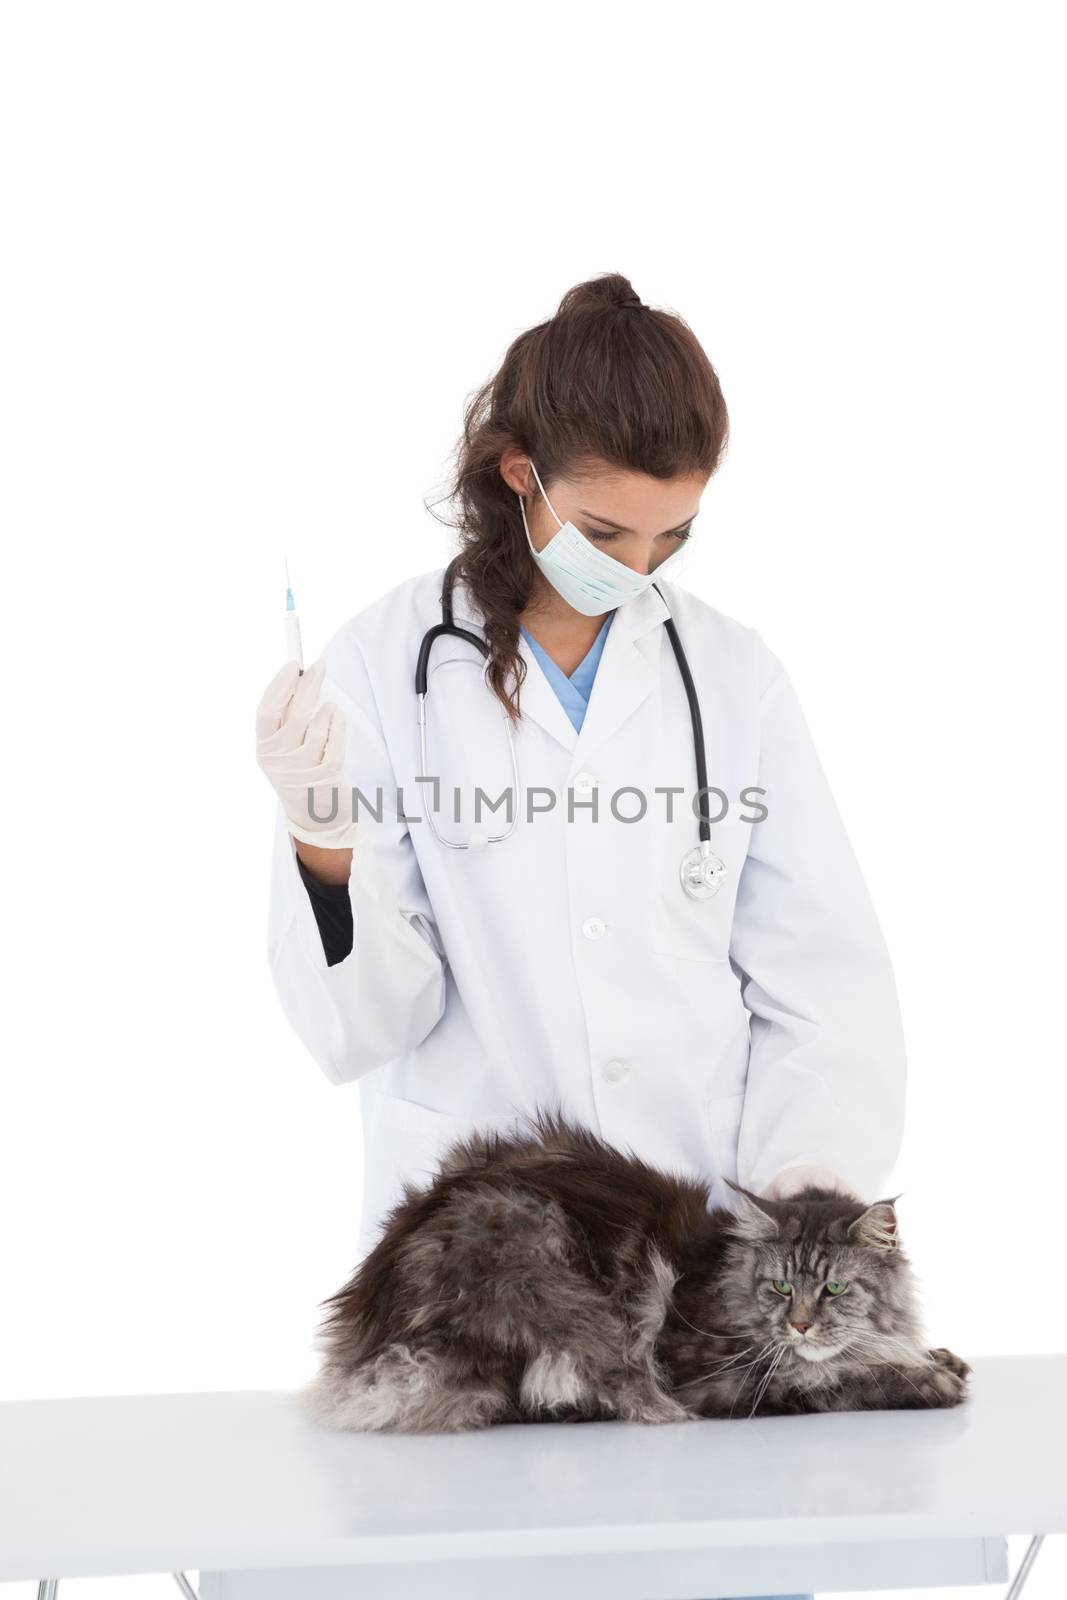 Vet examining a maine coon on white background